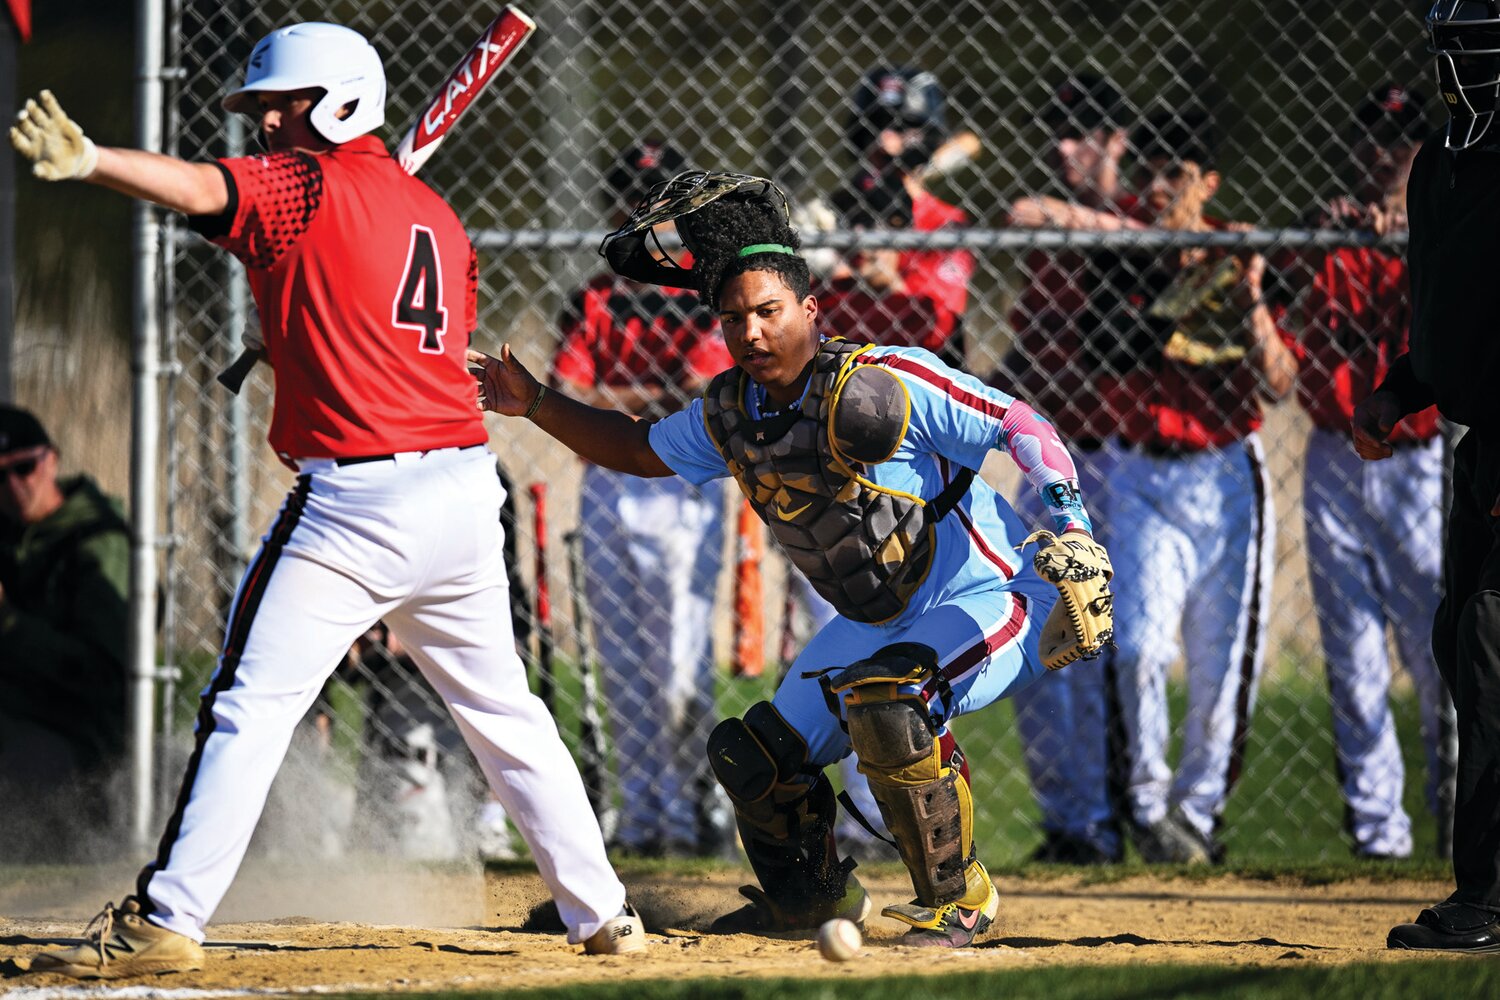 Faith Christian catcher Kendri Beltre gathers a wild pitch during the sixth inning.